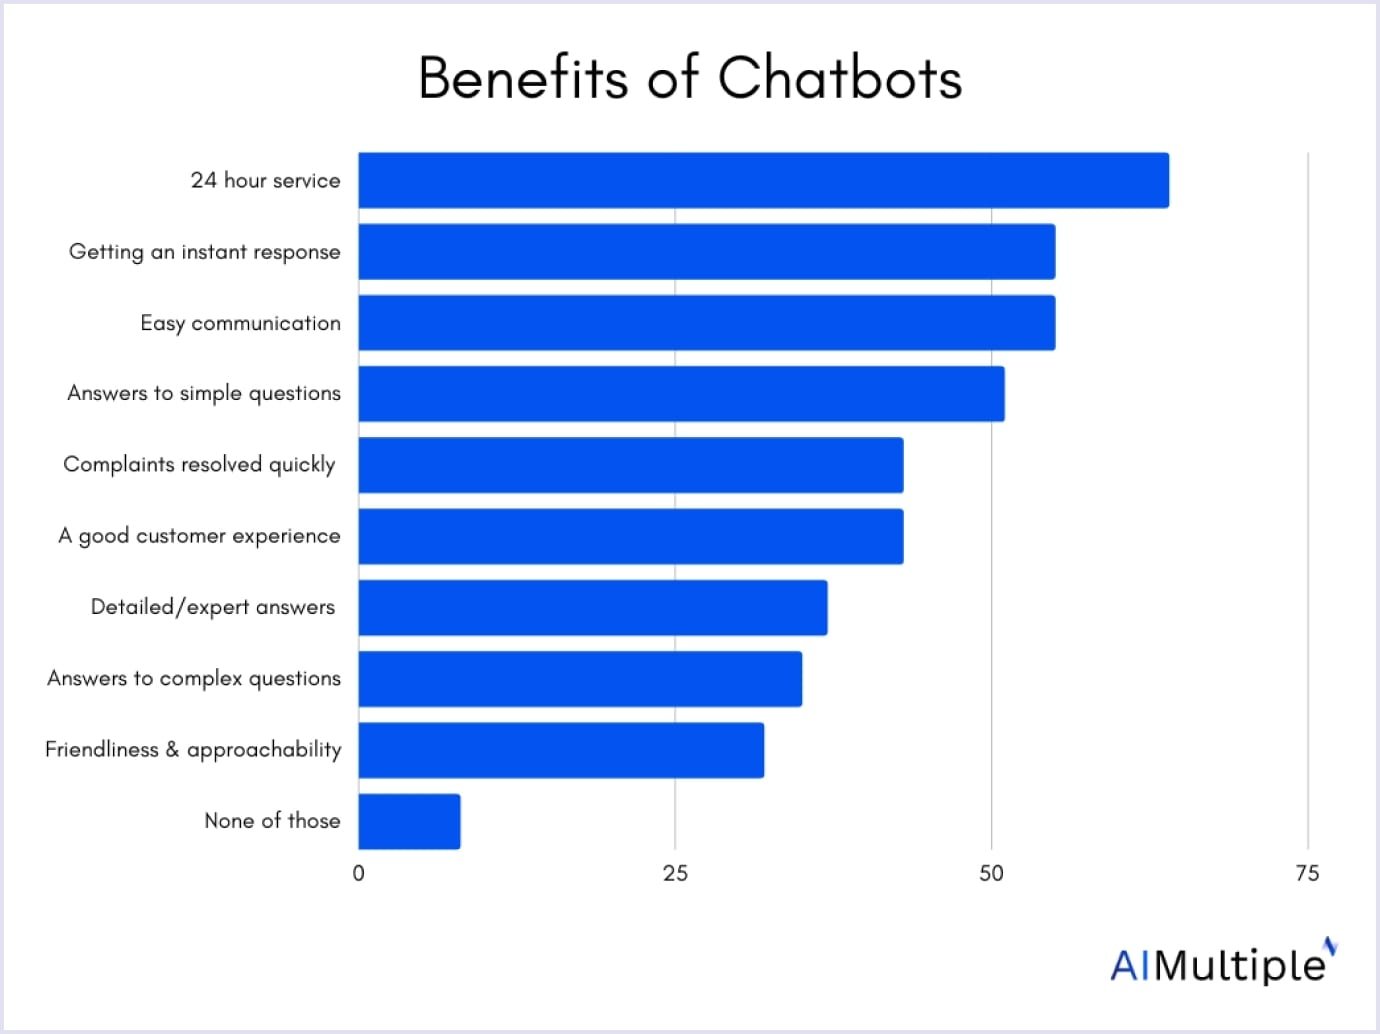 Сhatbots as a marketplace trend